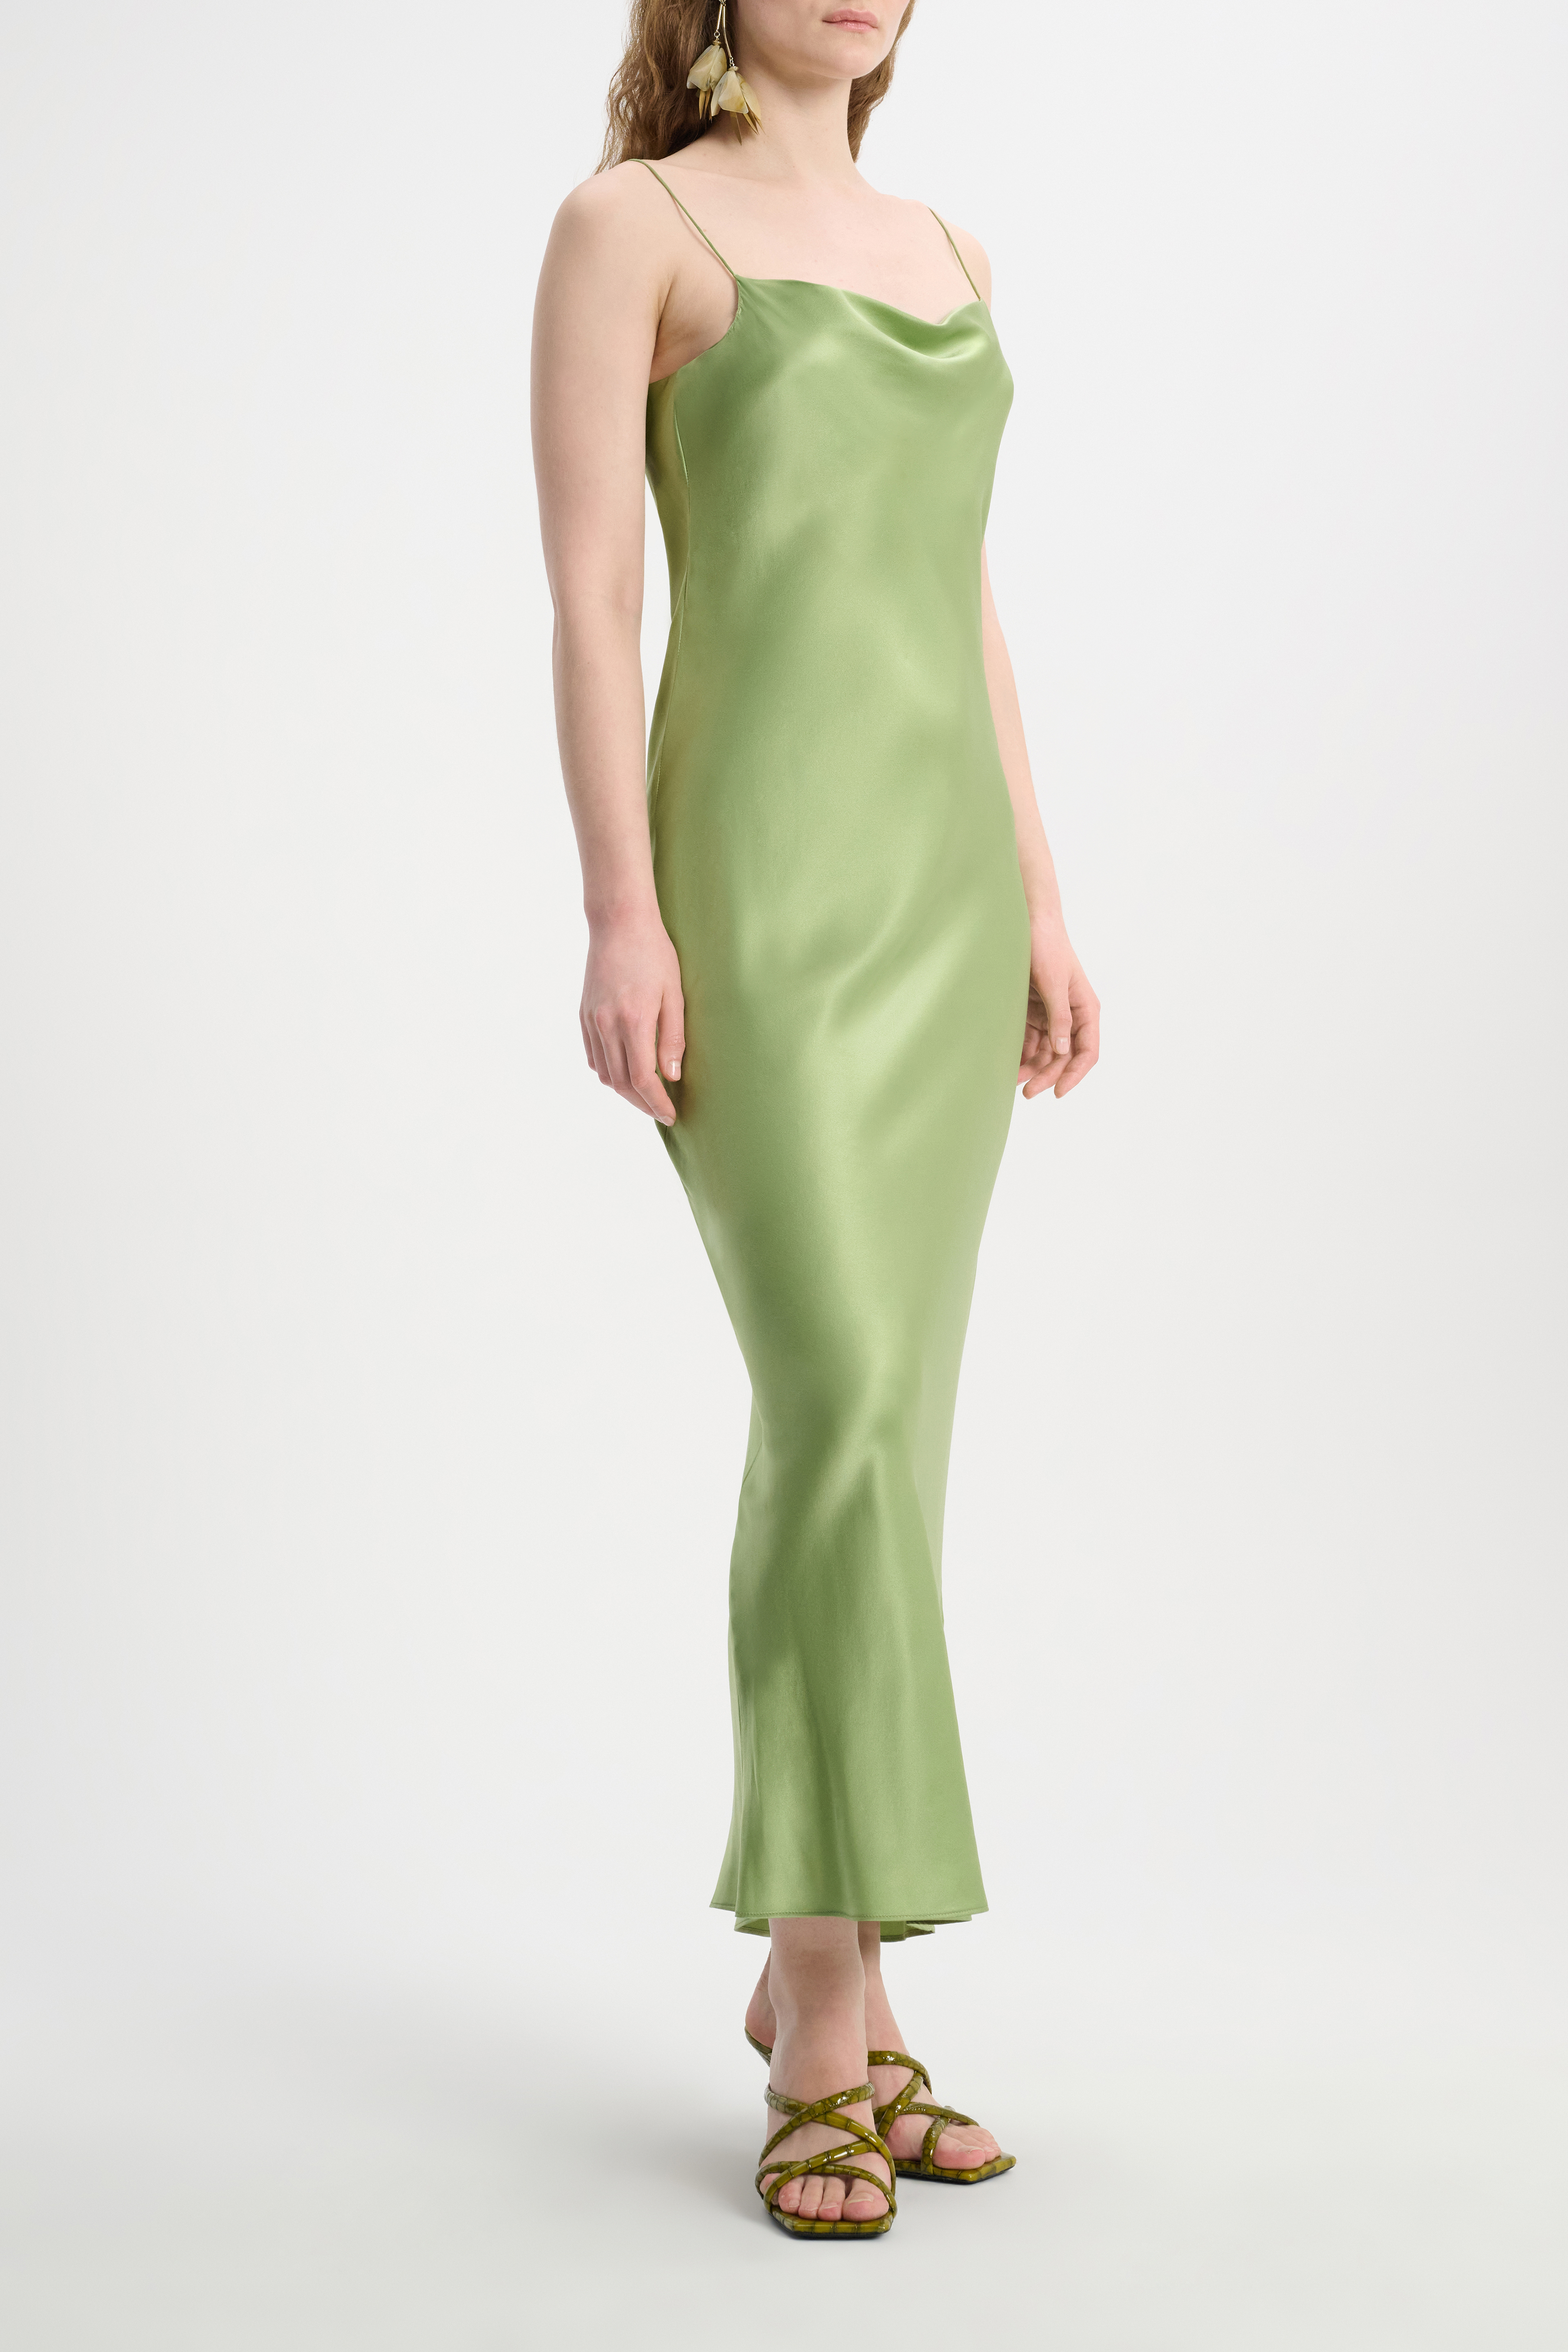 Dorothee Schumacher Silk charmeuse dress with a waterfall